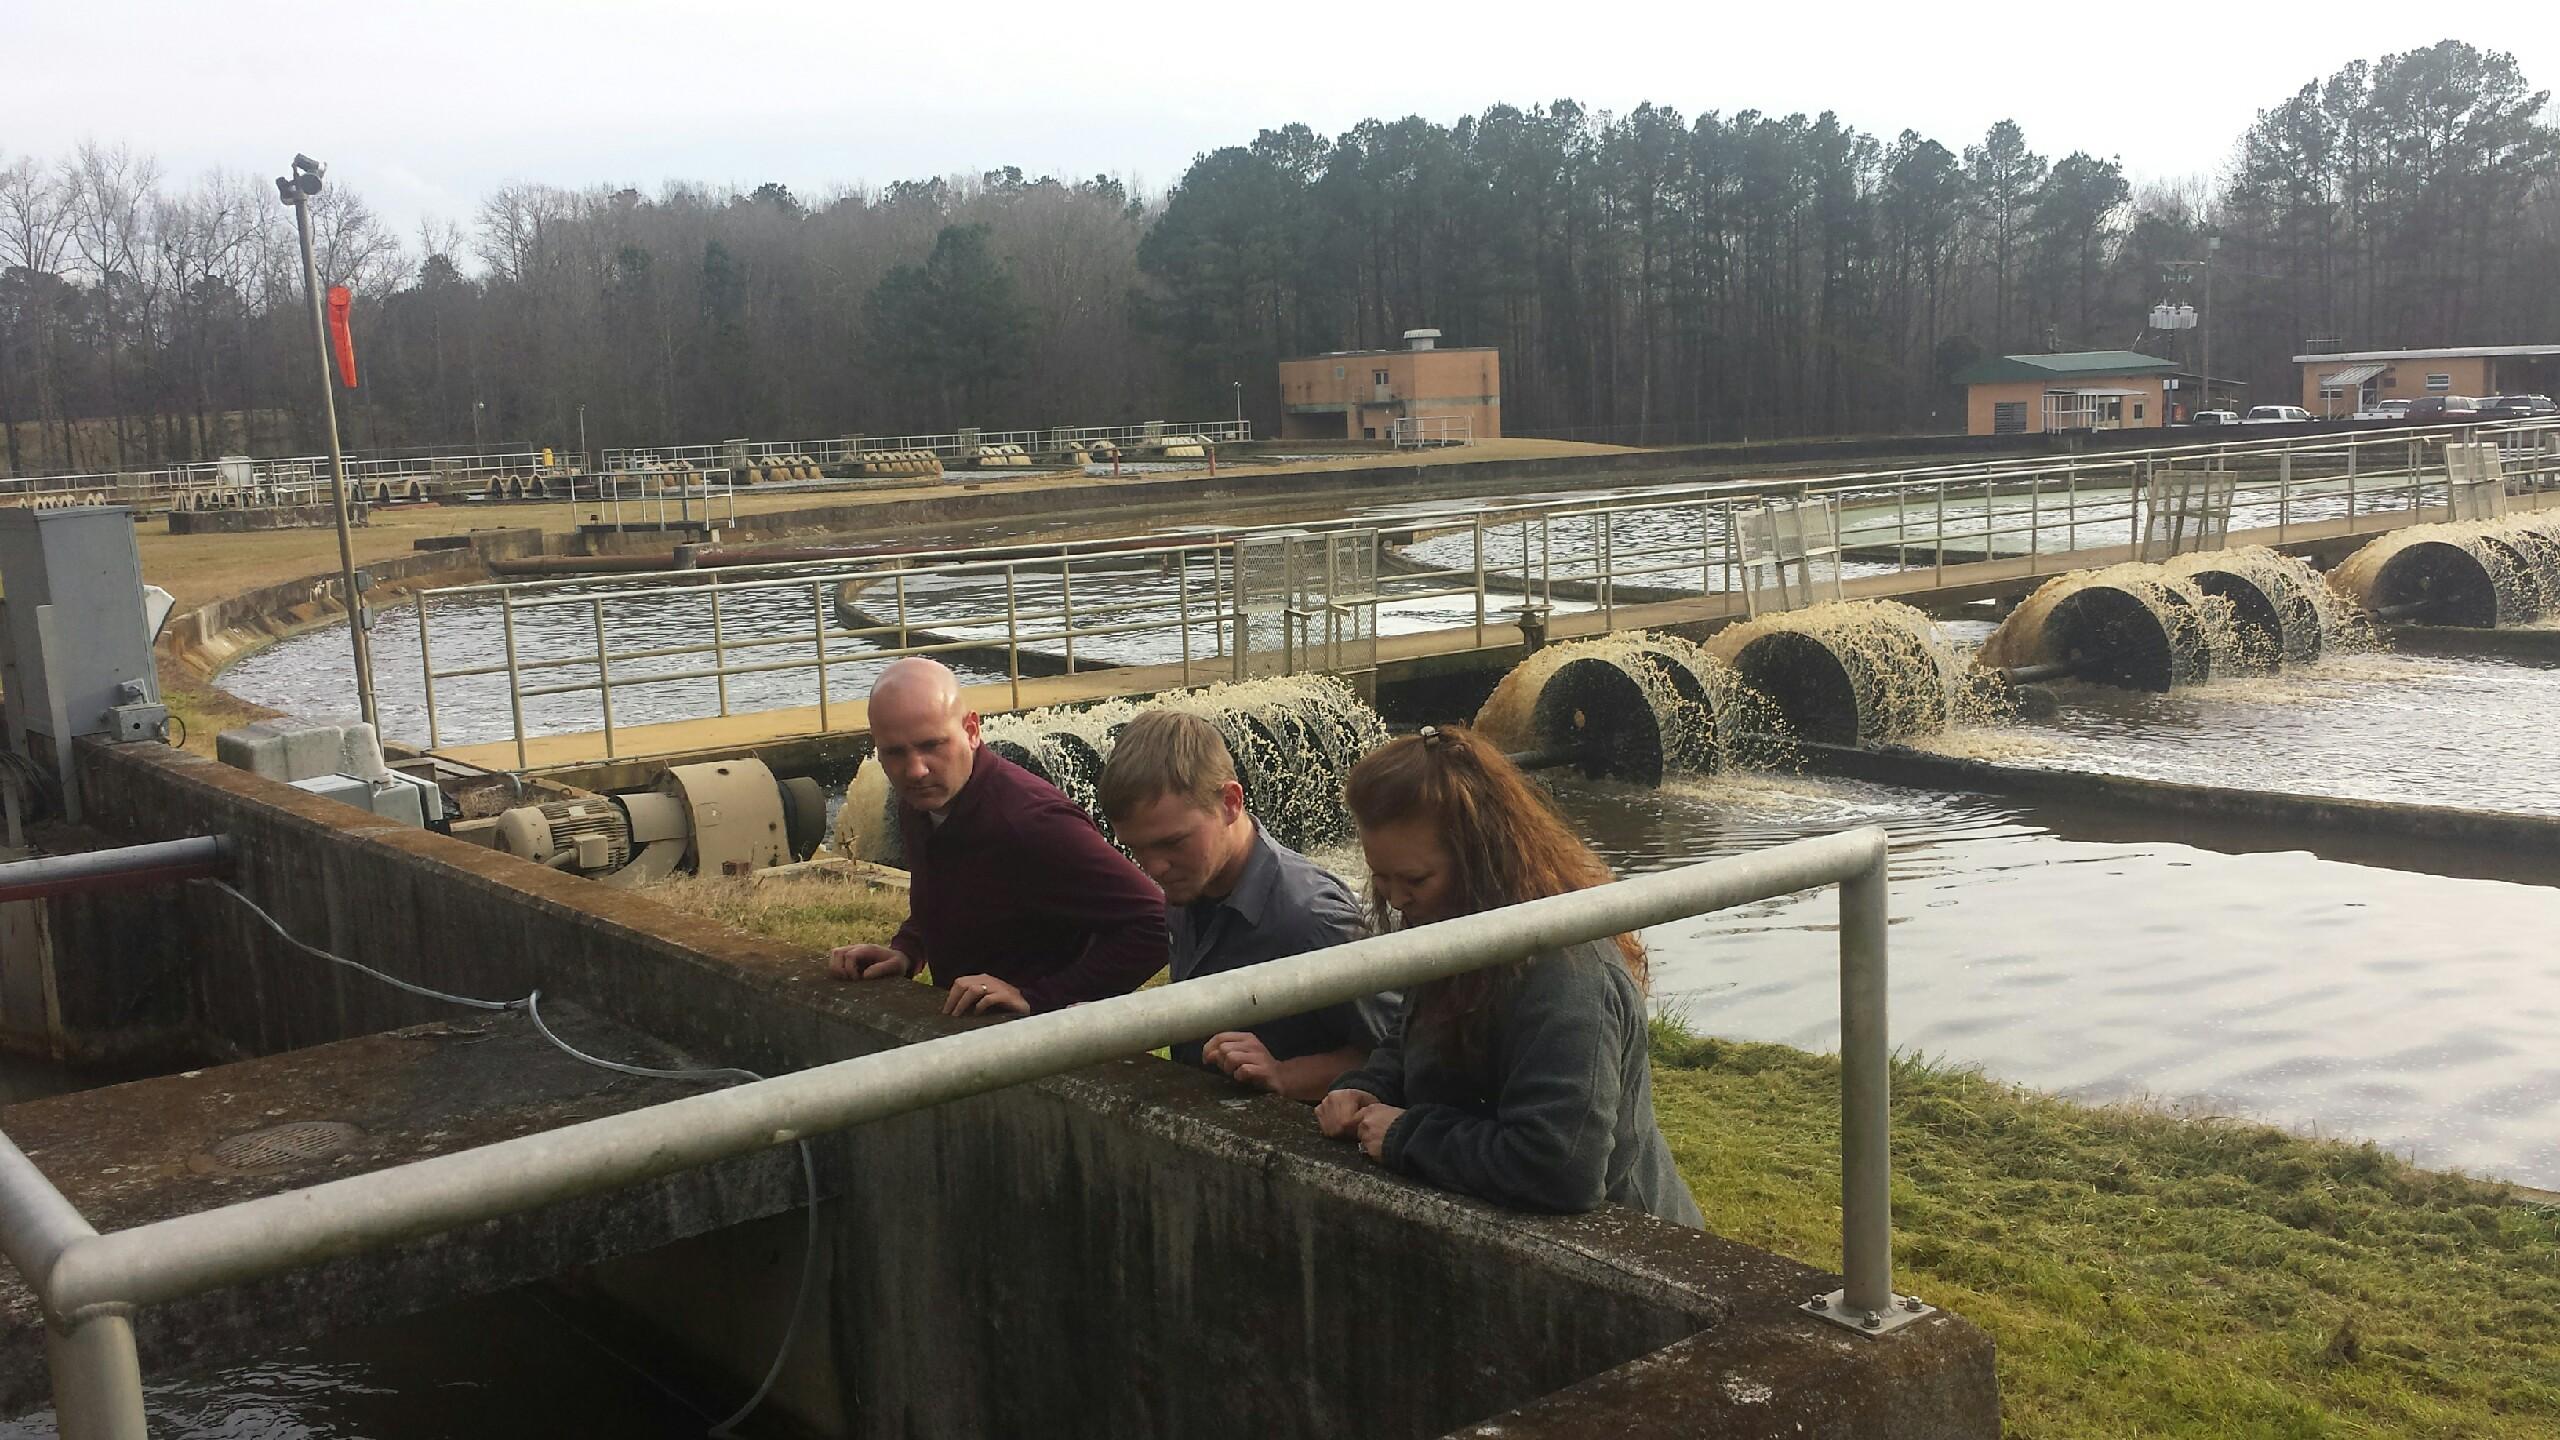 Ted Luckadoo and Batesburg-Leesbille utility staff inspecting town's feed system